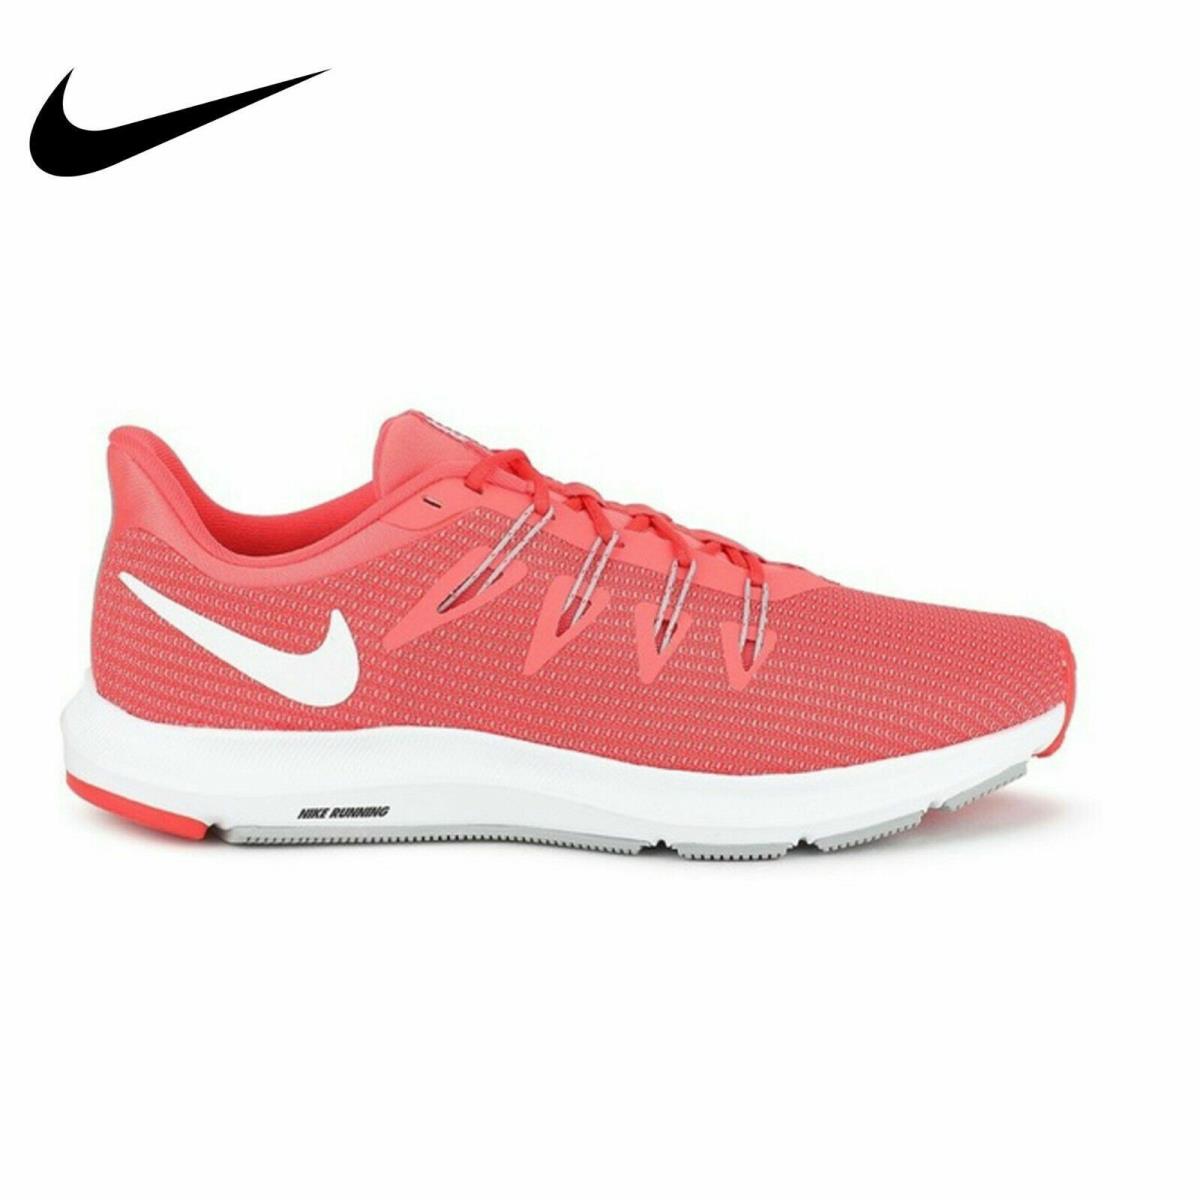 Nike Women`s Quest Running Shoes Ember Glow White AA7412-800 Size 8.5 - 9 - Red